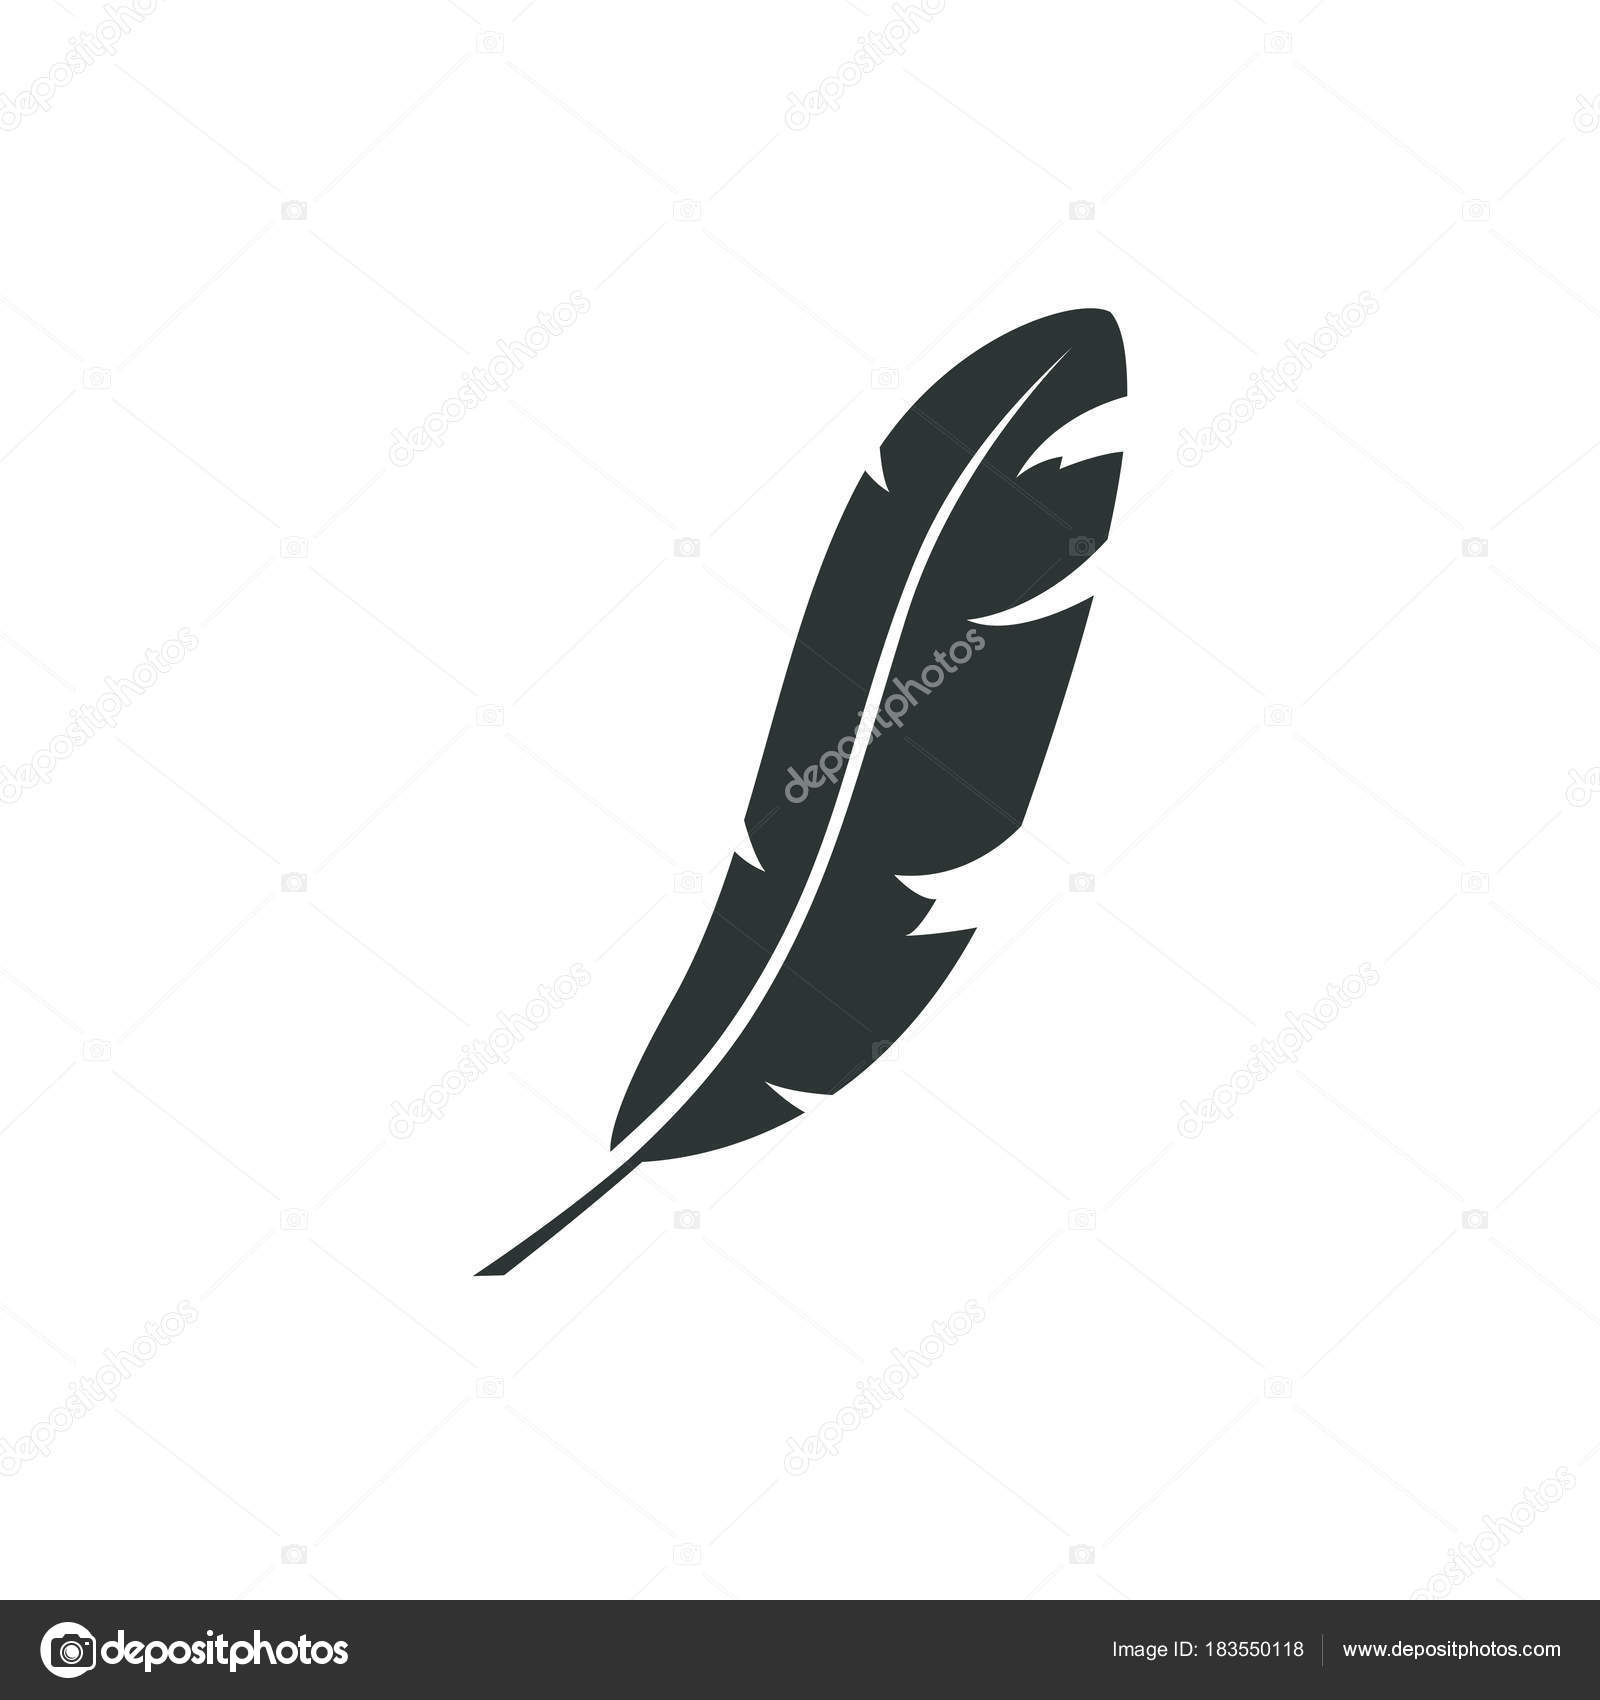 Feather vector icon isolated on white background. Pen for ...